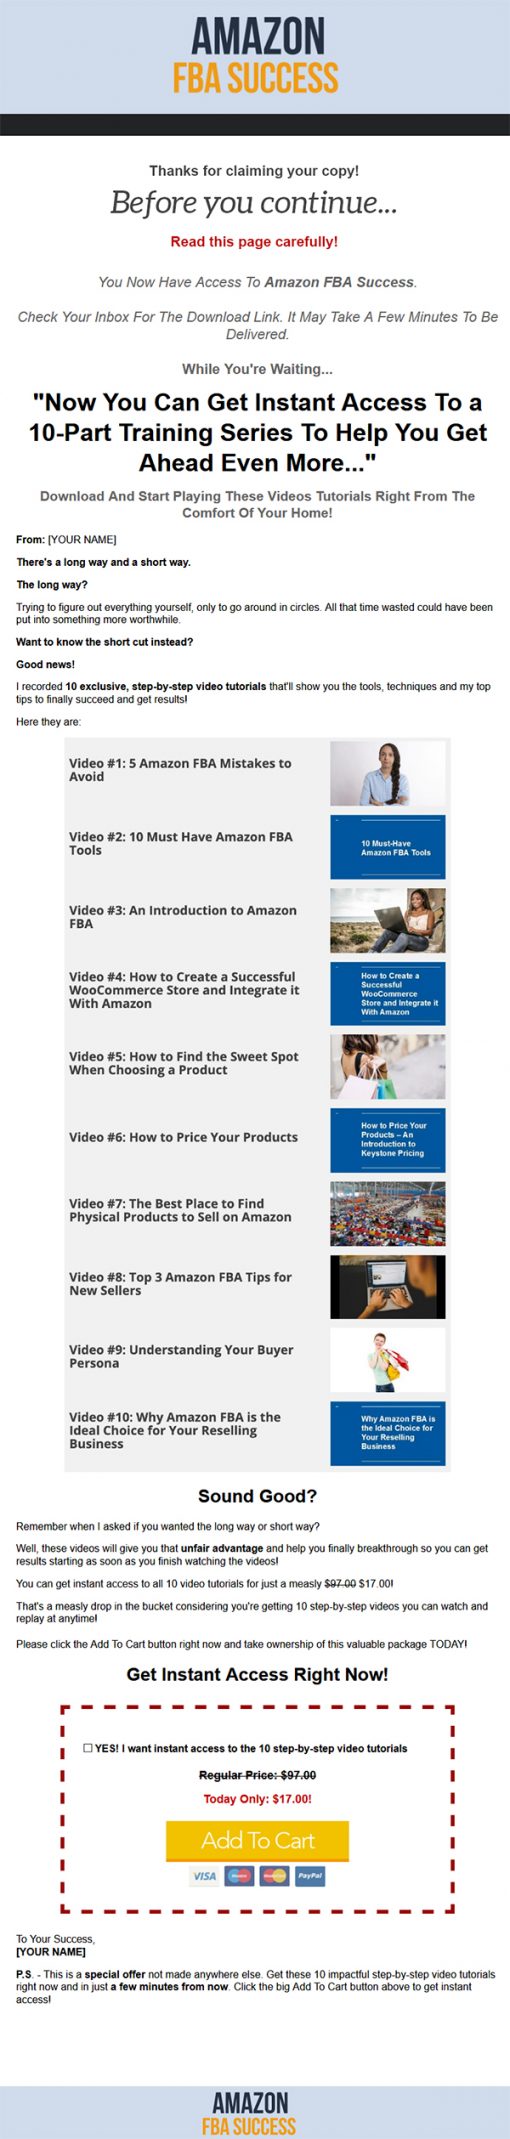 Amazon FBA Success Ebook and Videos with Master Resale Rights